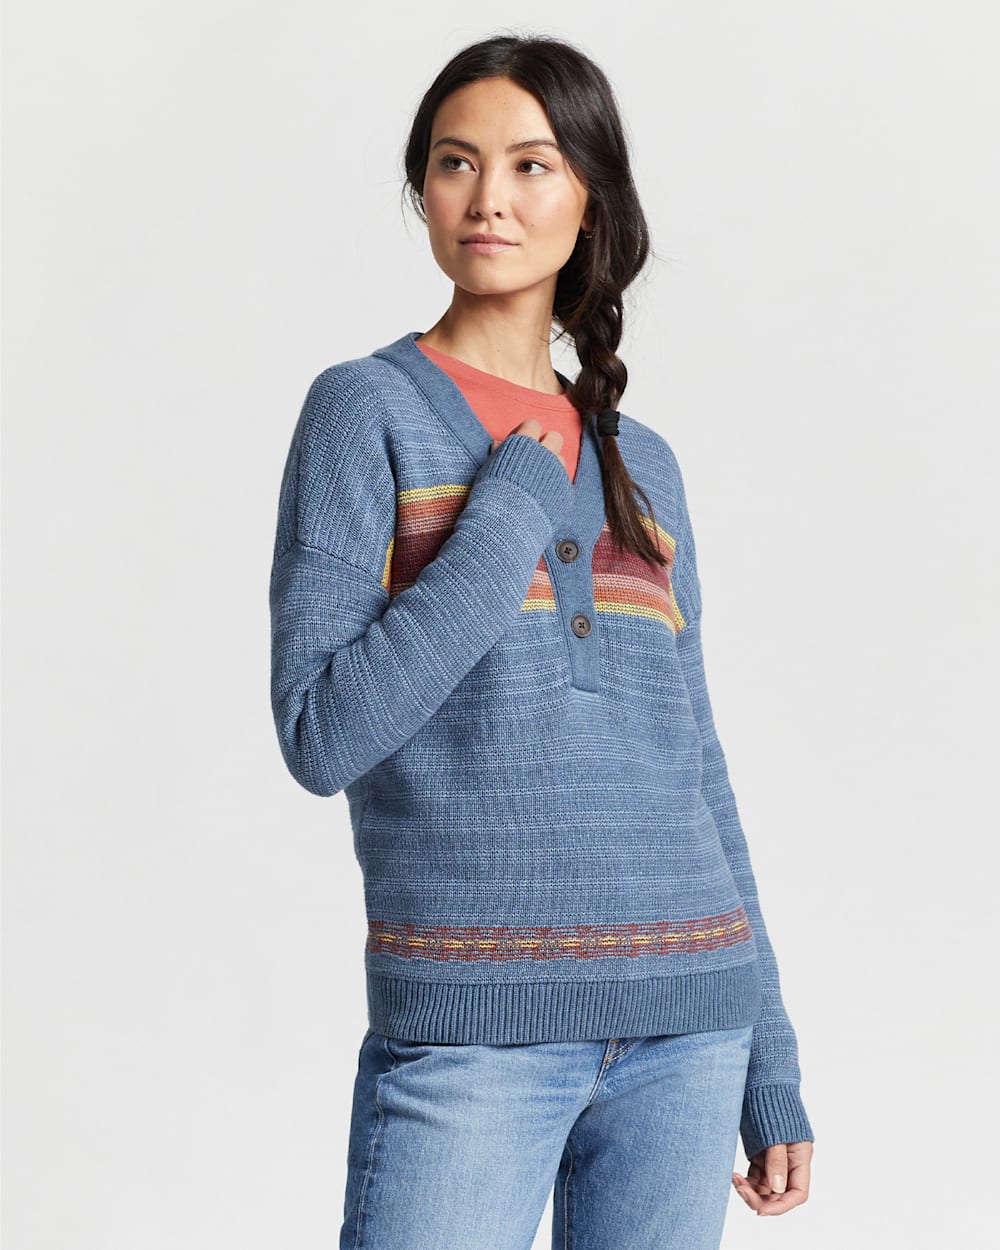 WOMEN'S V-NECK HENLEY GRAPHIC SWEATER IN BLUE MULTI image number 1